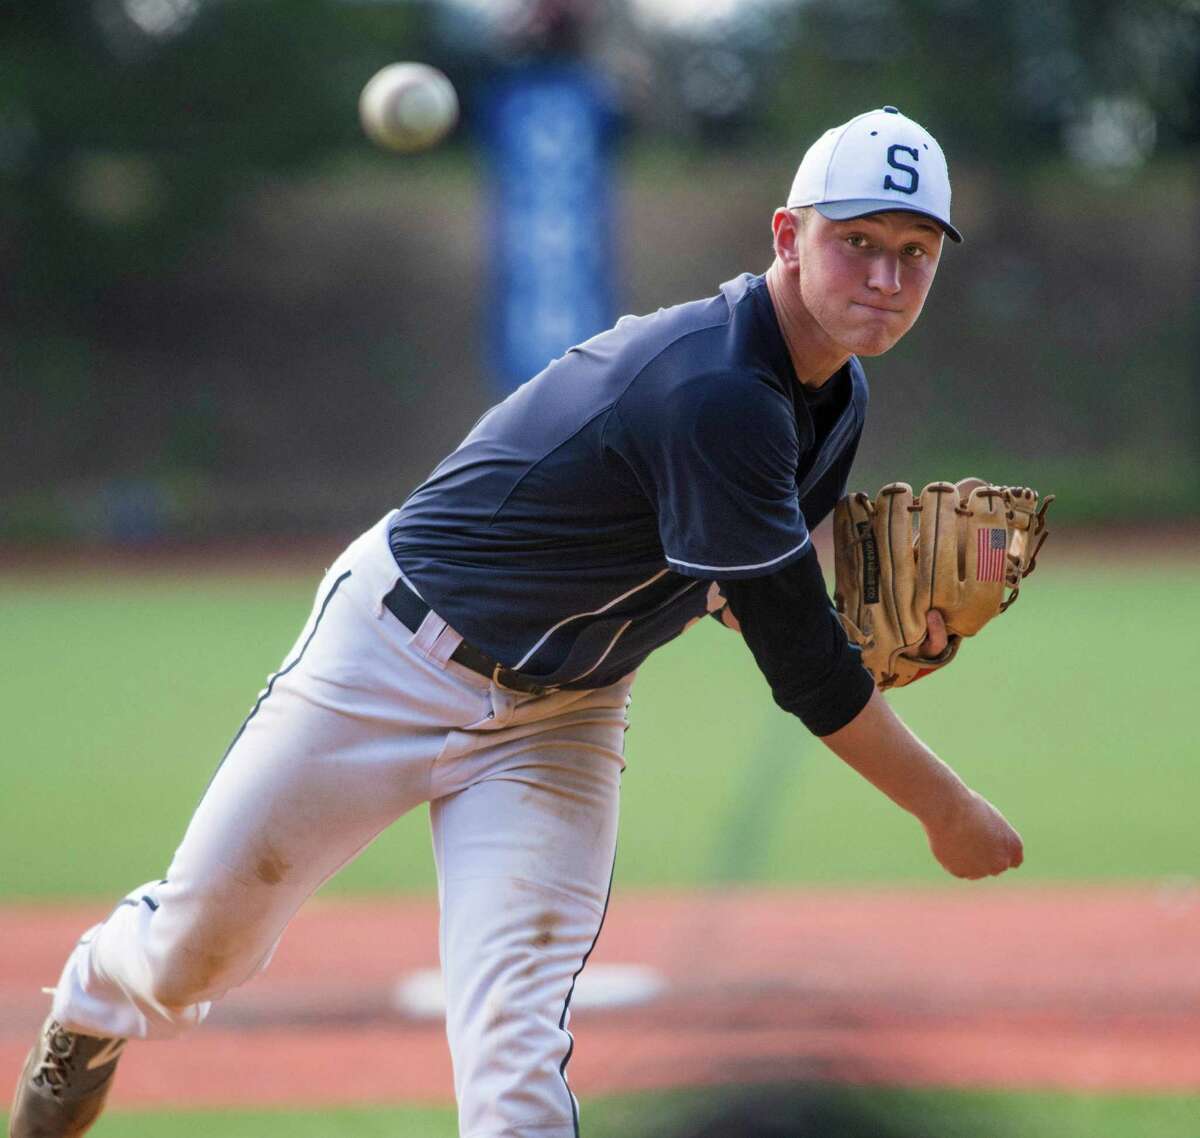 Staples high school pitcher Benjamin Casparius on the mound during a baseball game against Darien high school played at Darien high school, Darien, CT on Friday, May, 15th, 2015.